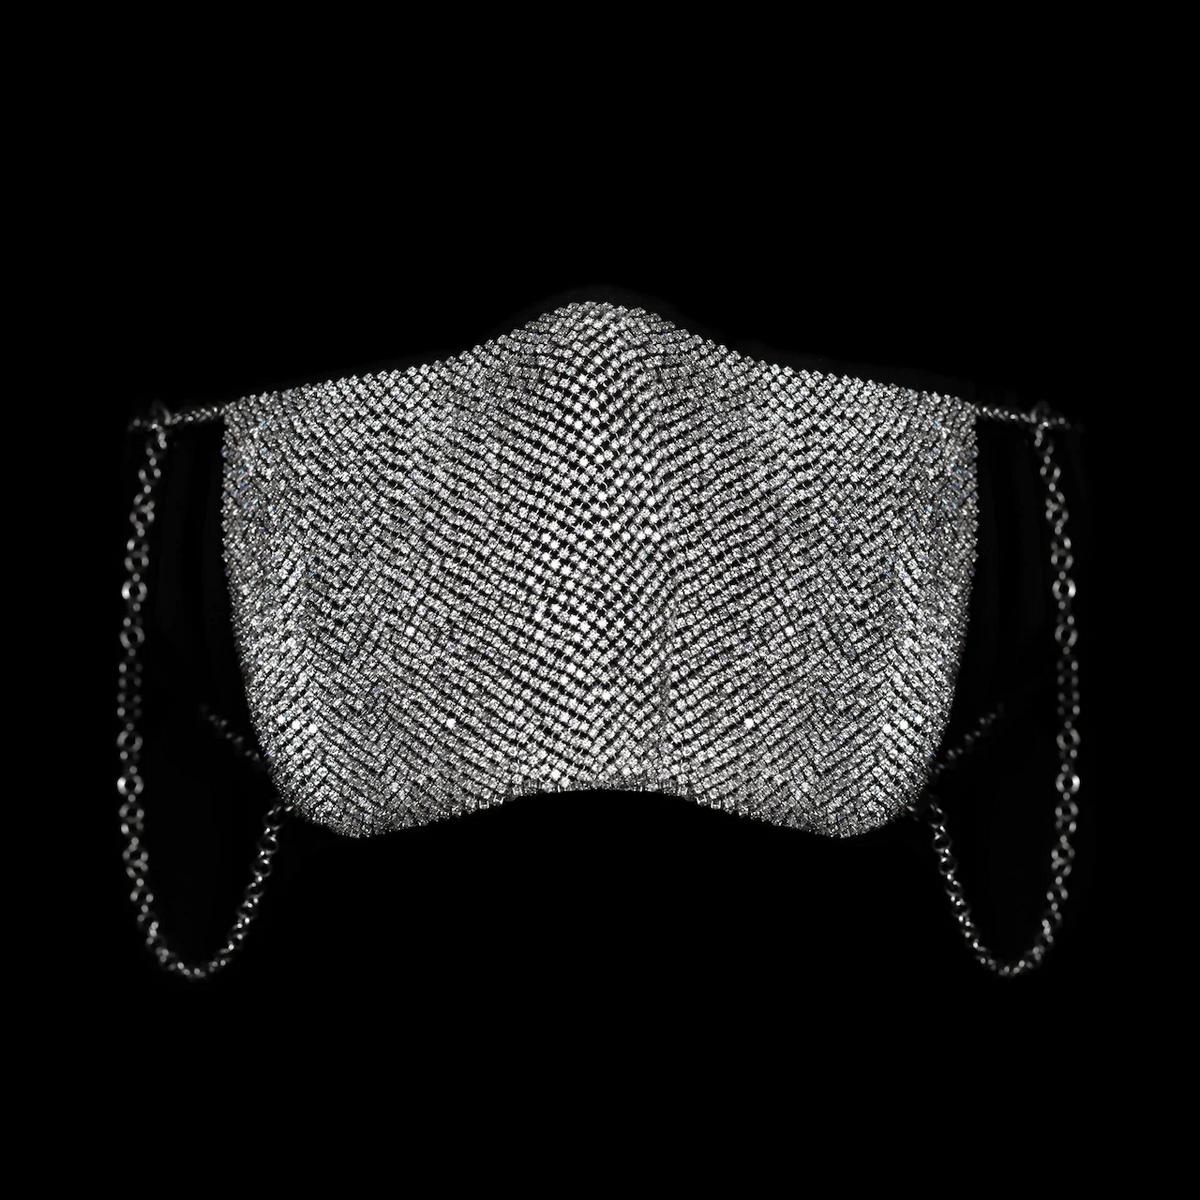 Louis Vuitton to launch £750 face shield that can also be worn as